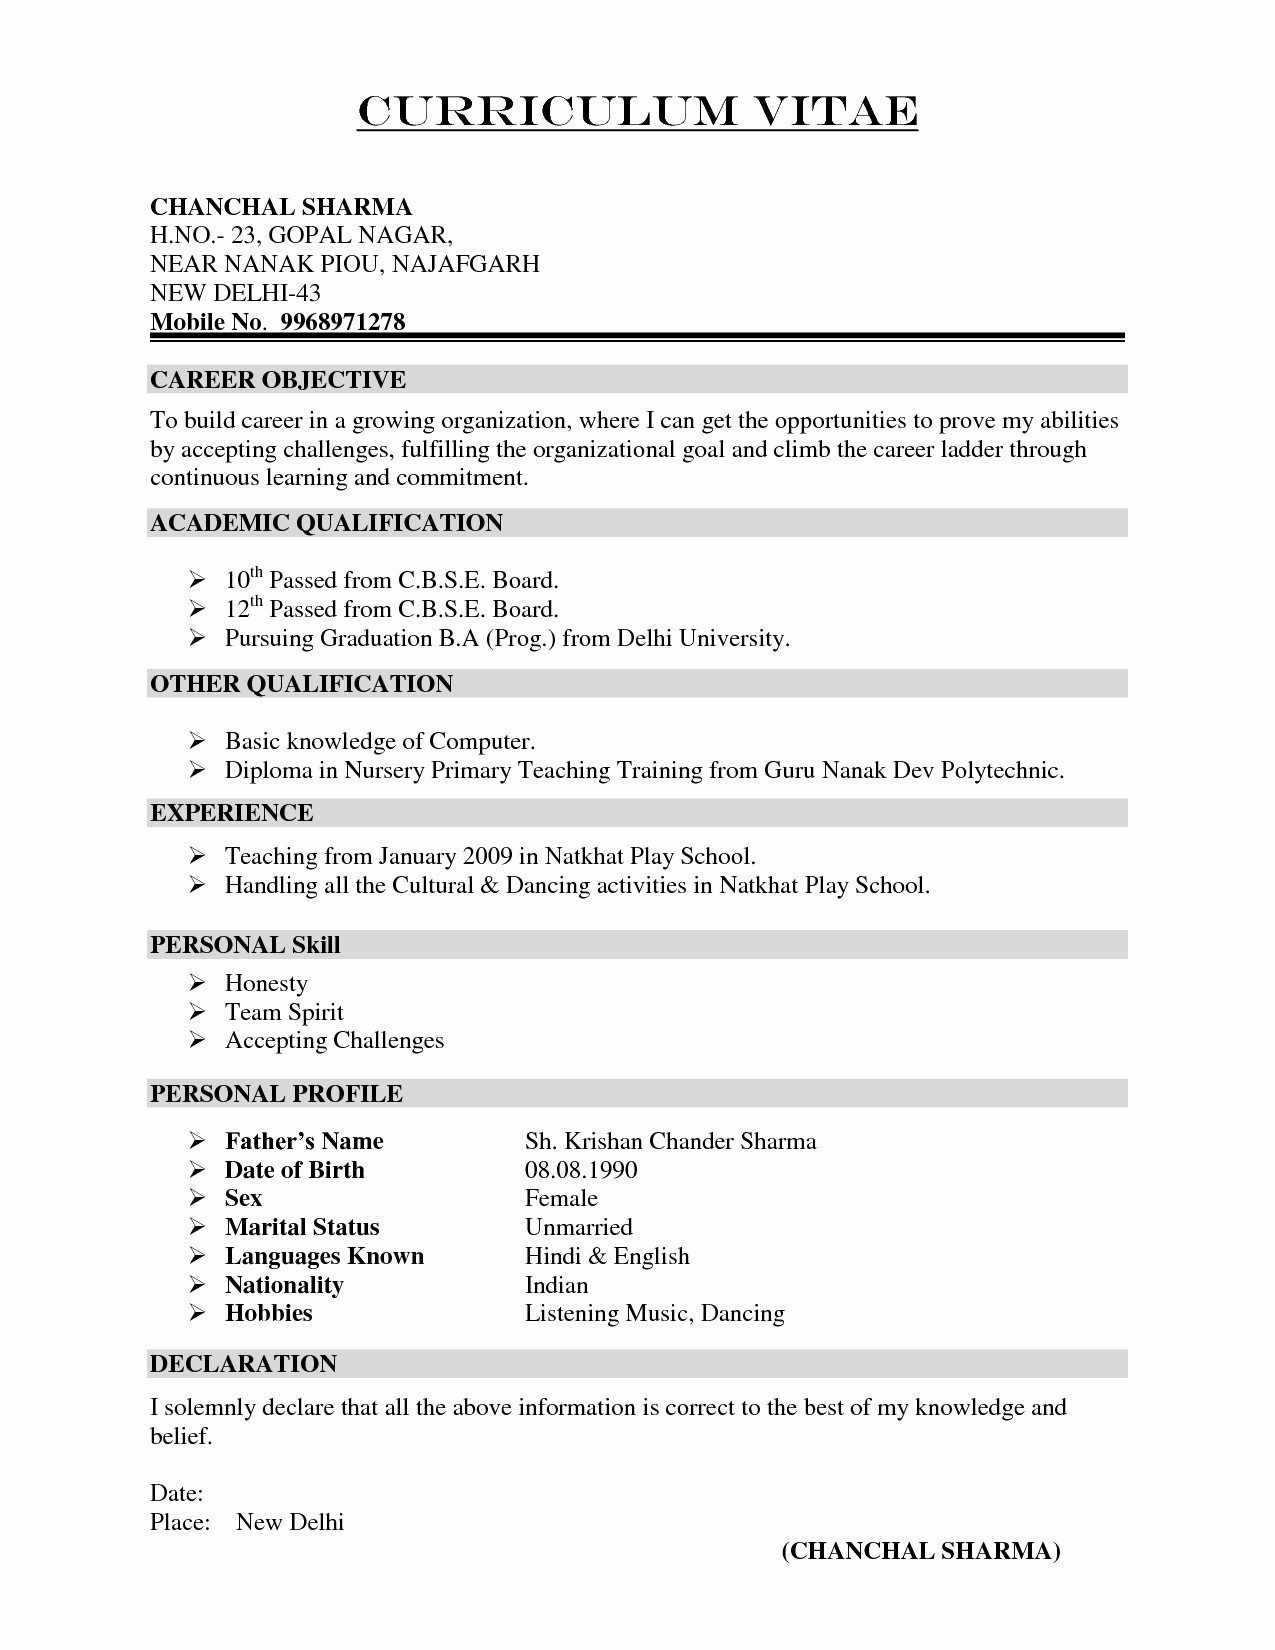 Resume Cover Letter Template - Resumes and Cover Letters Elegant New Resume Cover Letter formatted